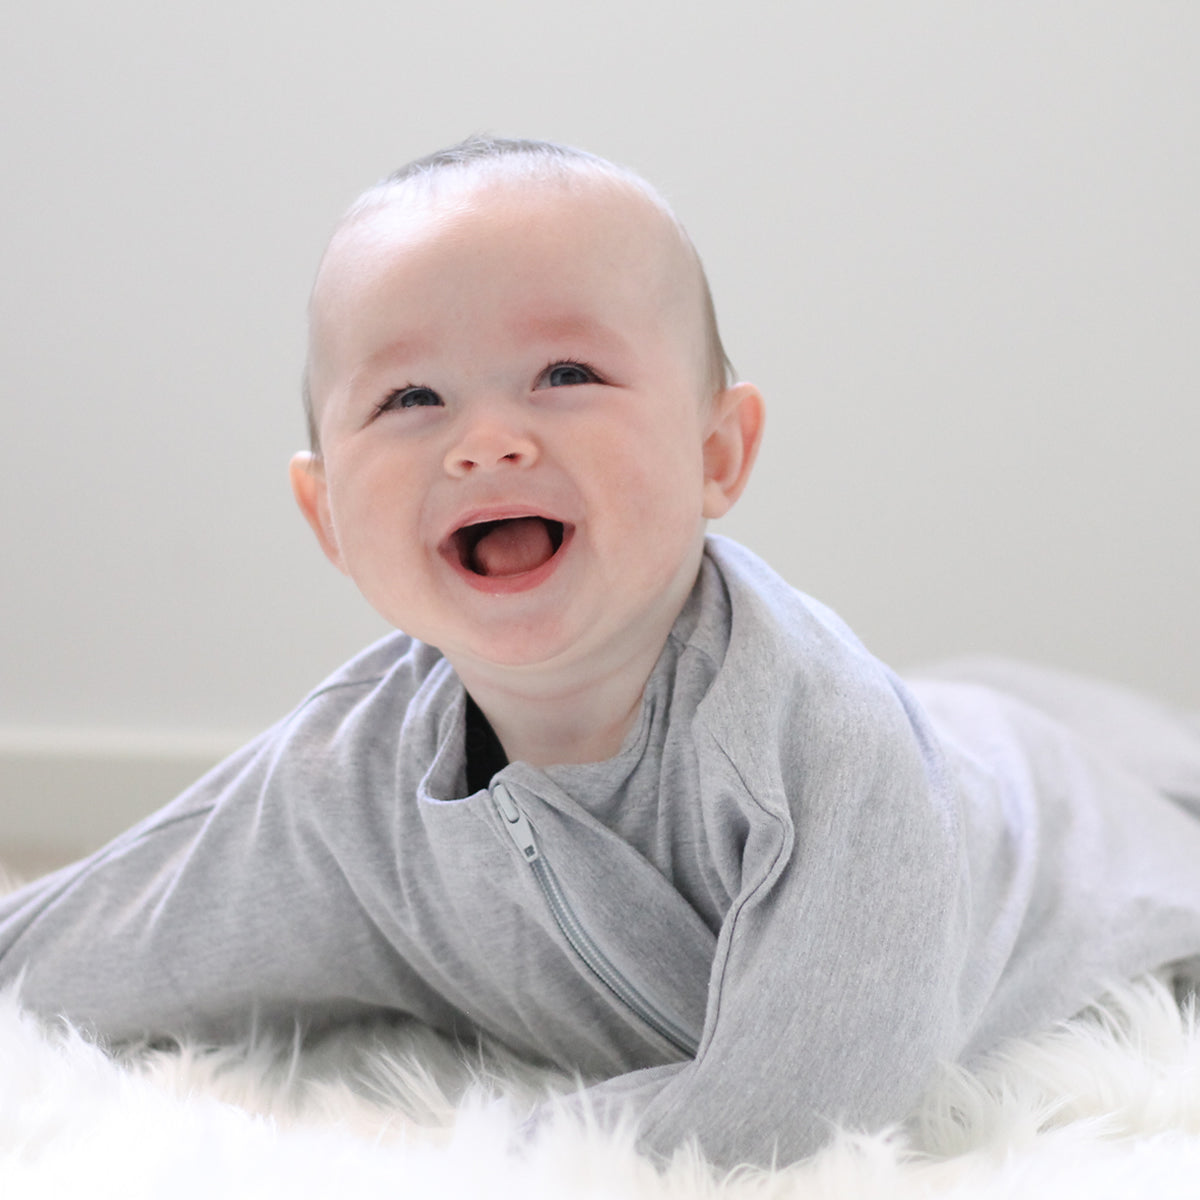 Swaddle transitioning baby sleep sack for all seasons